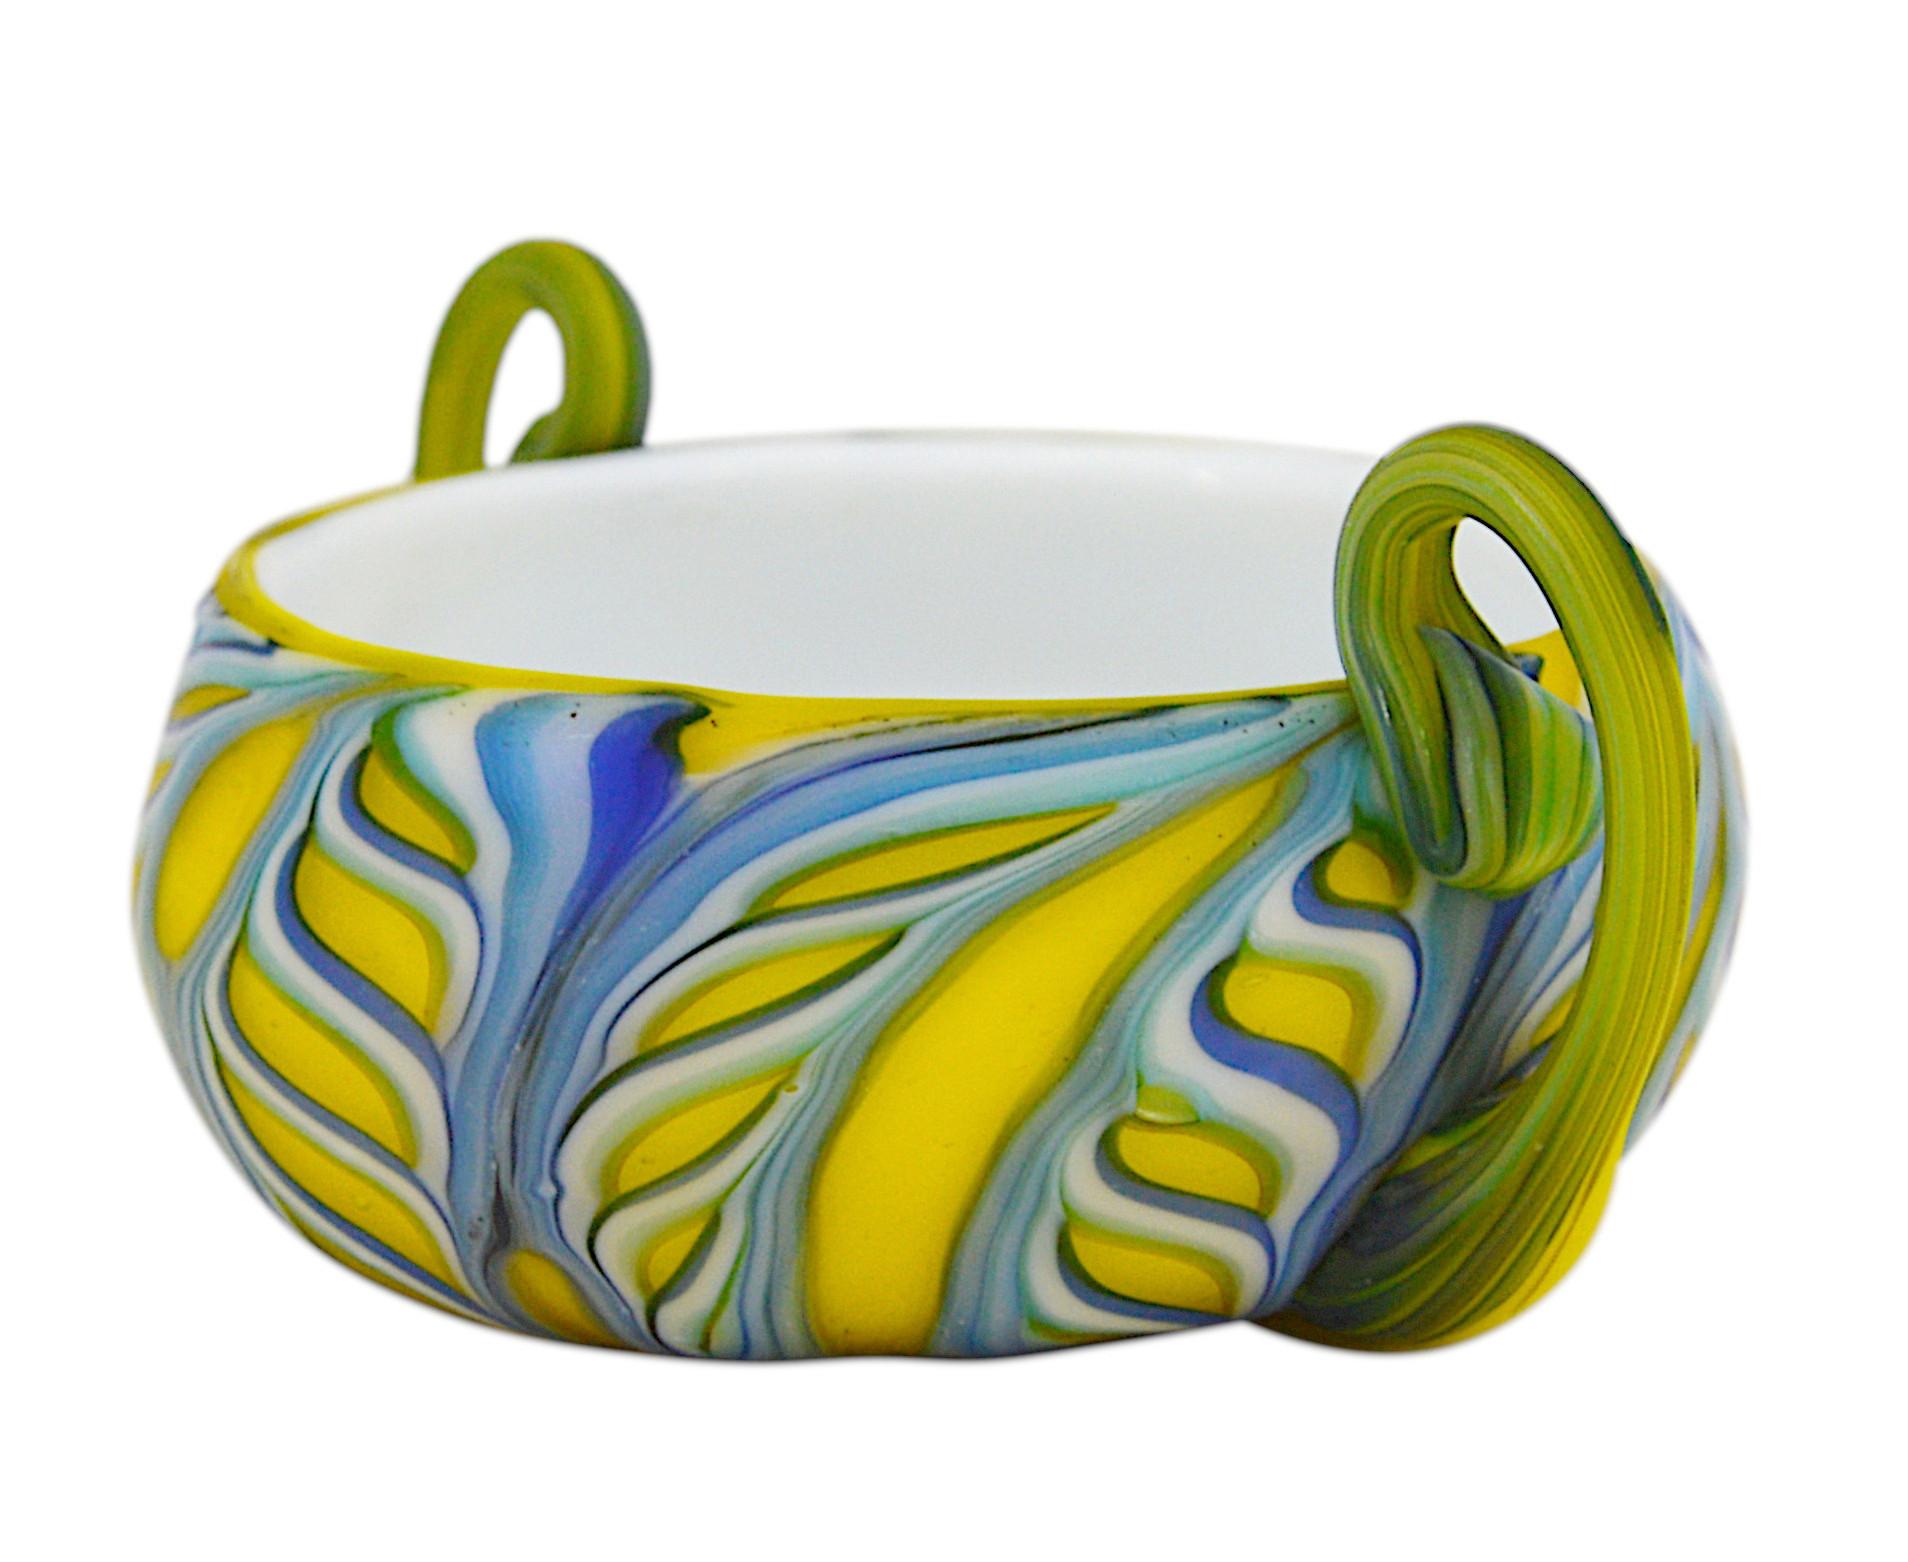 Fenicia bowl by Barovier, Murano, ca.1900. Blown double glass. Yellow, blue, green and white glass. 2 hot-applied handles. Measures: height: 1.6